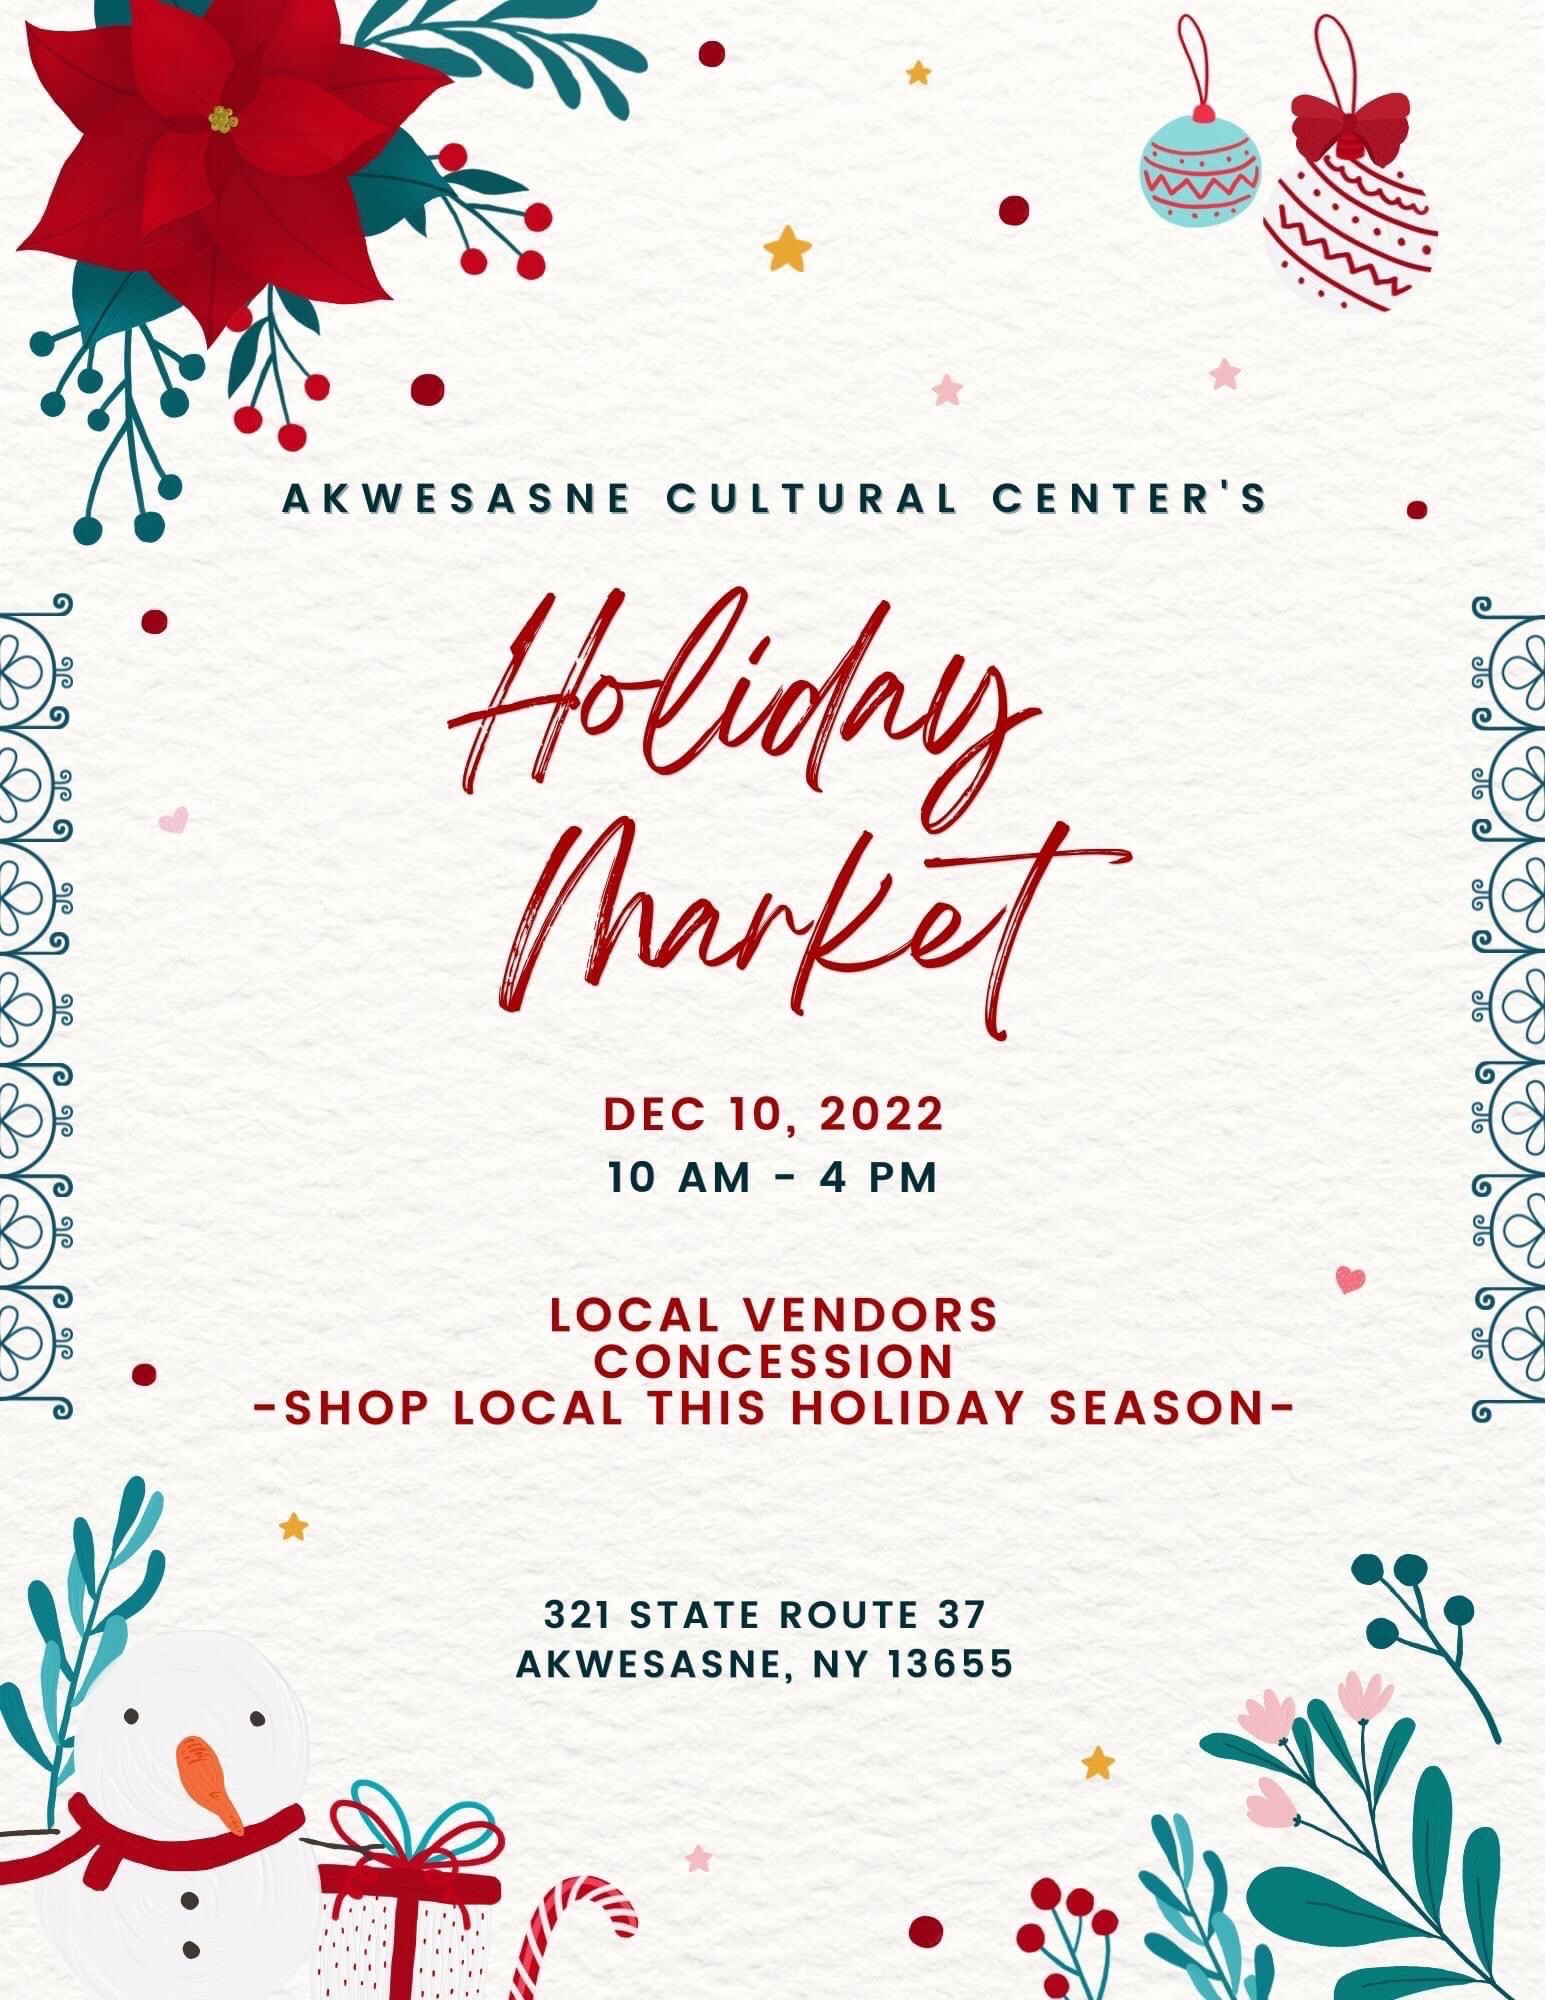 Shop local all things local this holiday season. The Akwesasne Cultural Center will have local artisans and craft vendors & concession available while you shop one-of-a-kind, unique finds.